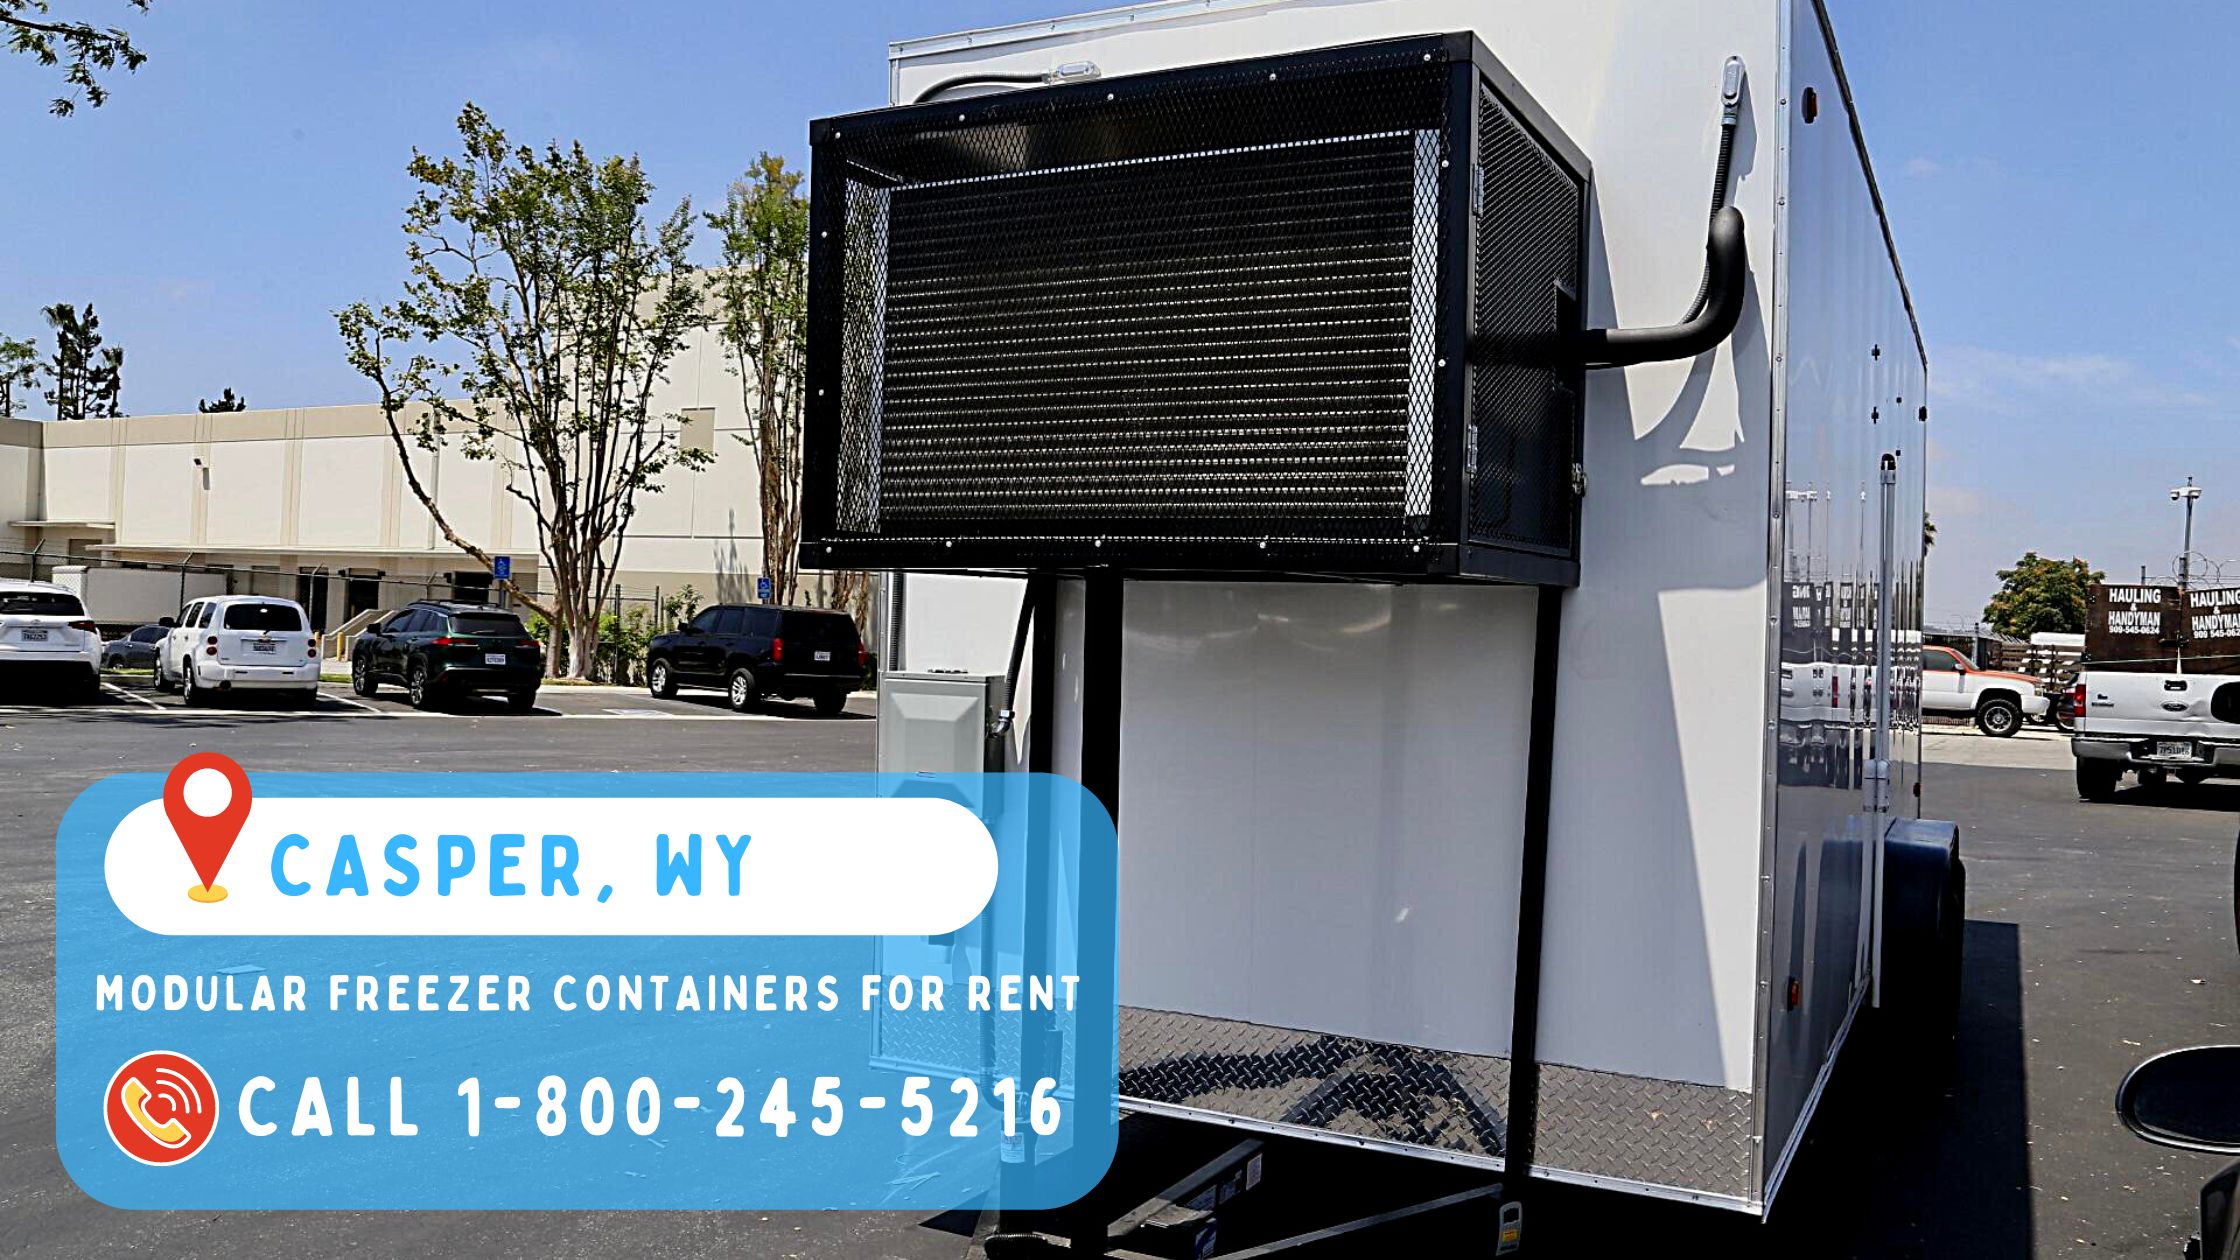 Modular Freezer Containers for Rent in Casper